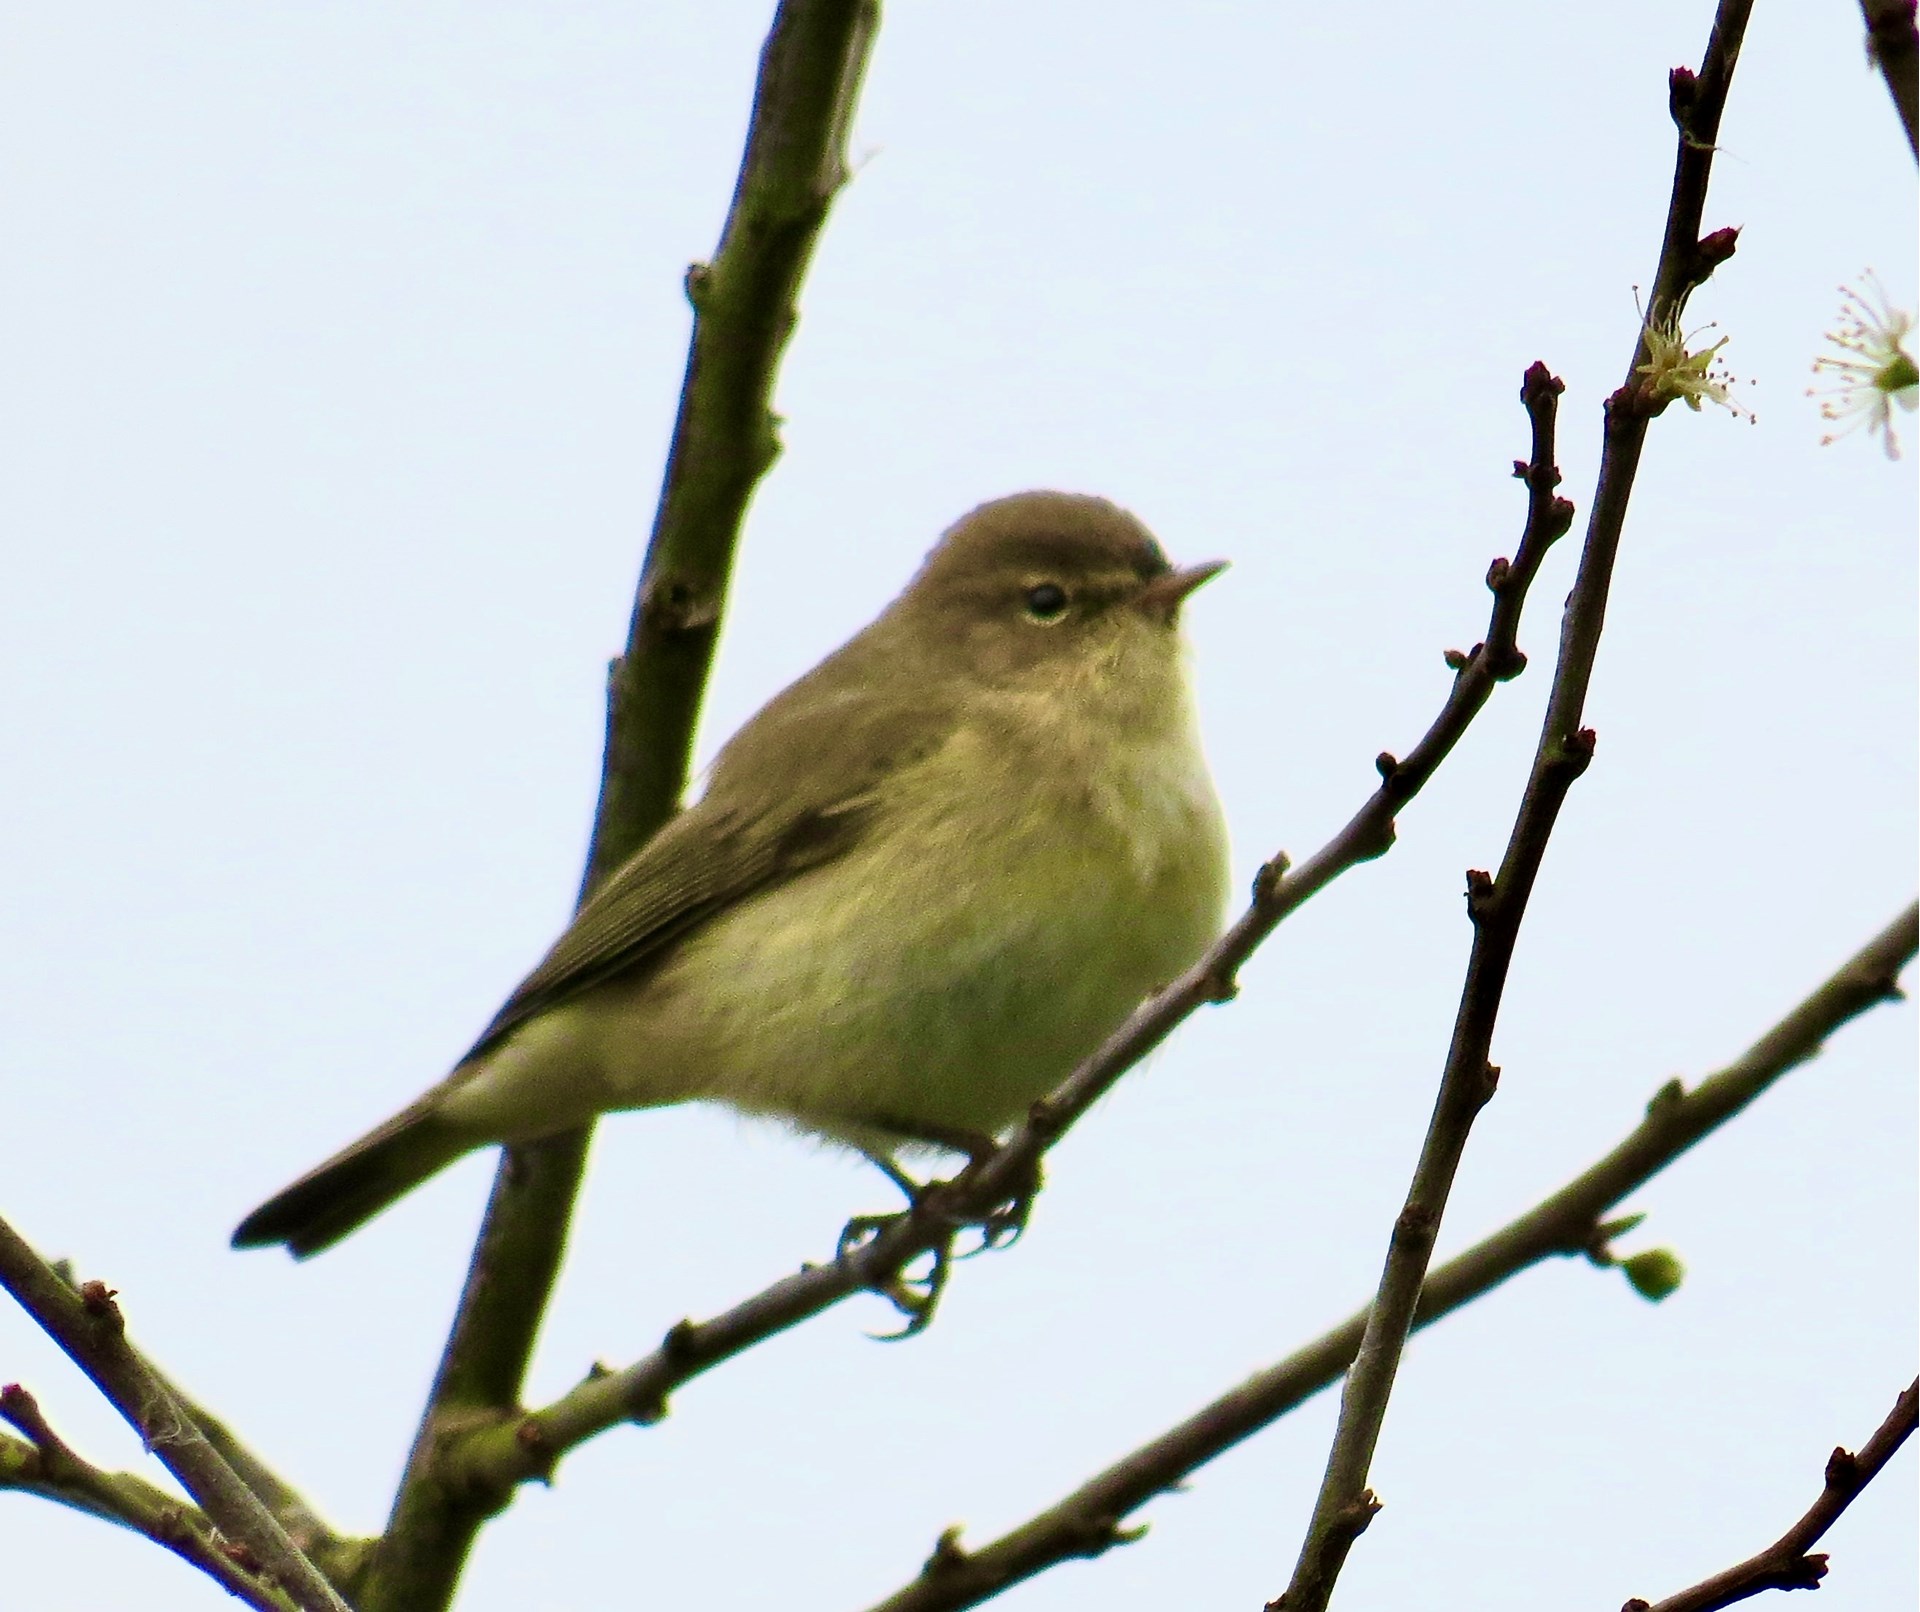 A Willow warbler about to burst into song